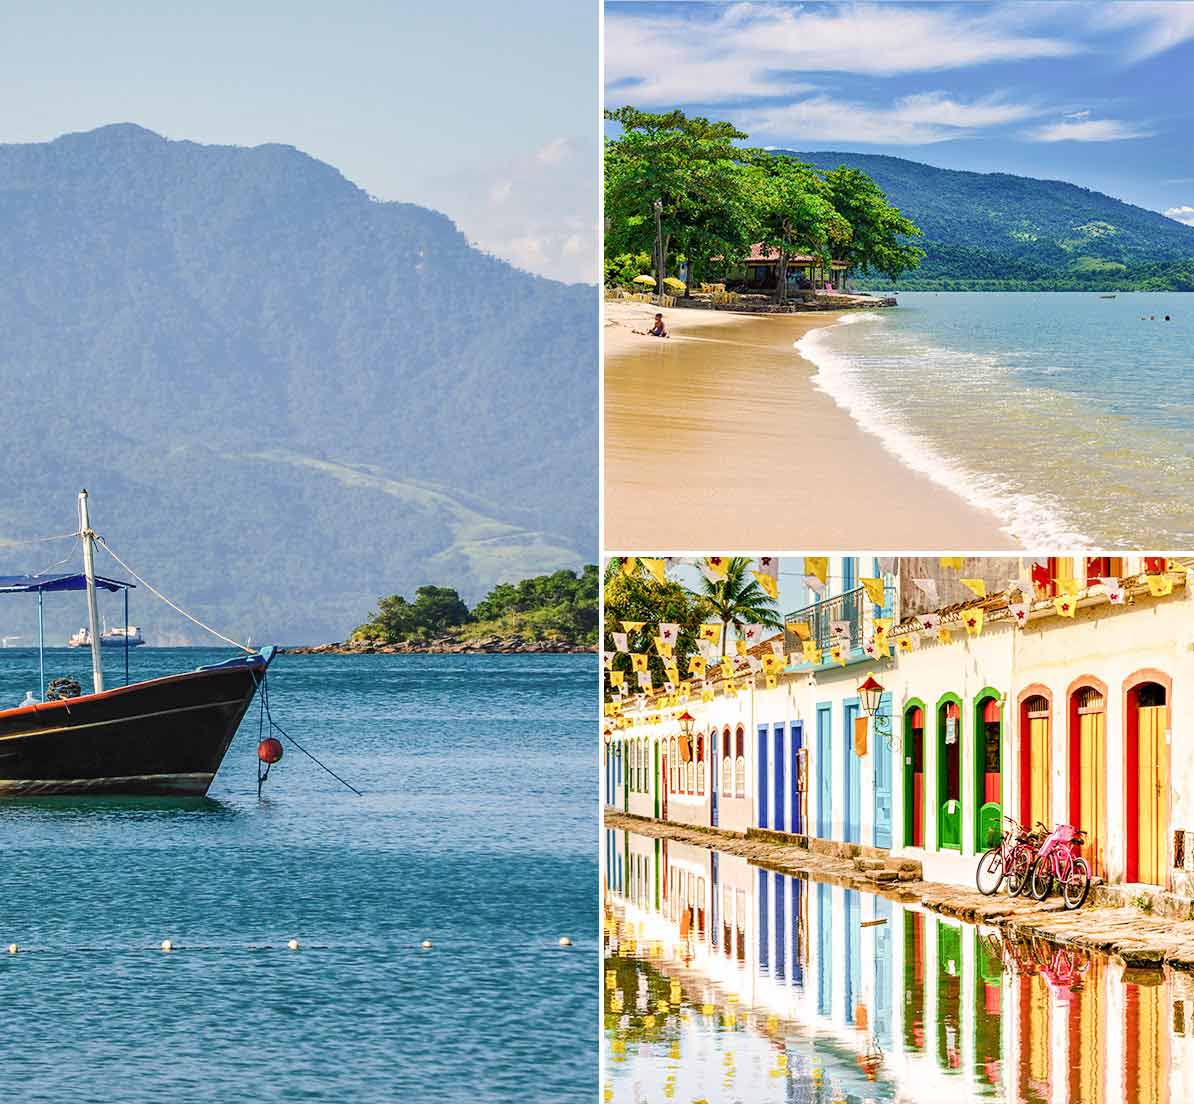 A collage of a boat in the ocean, a tropical beach, and a street with classic houses in Paraty.